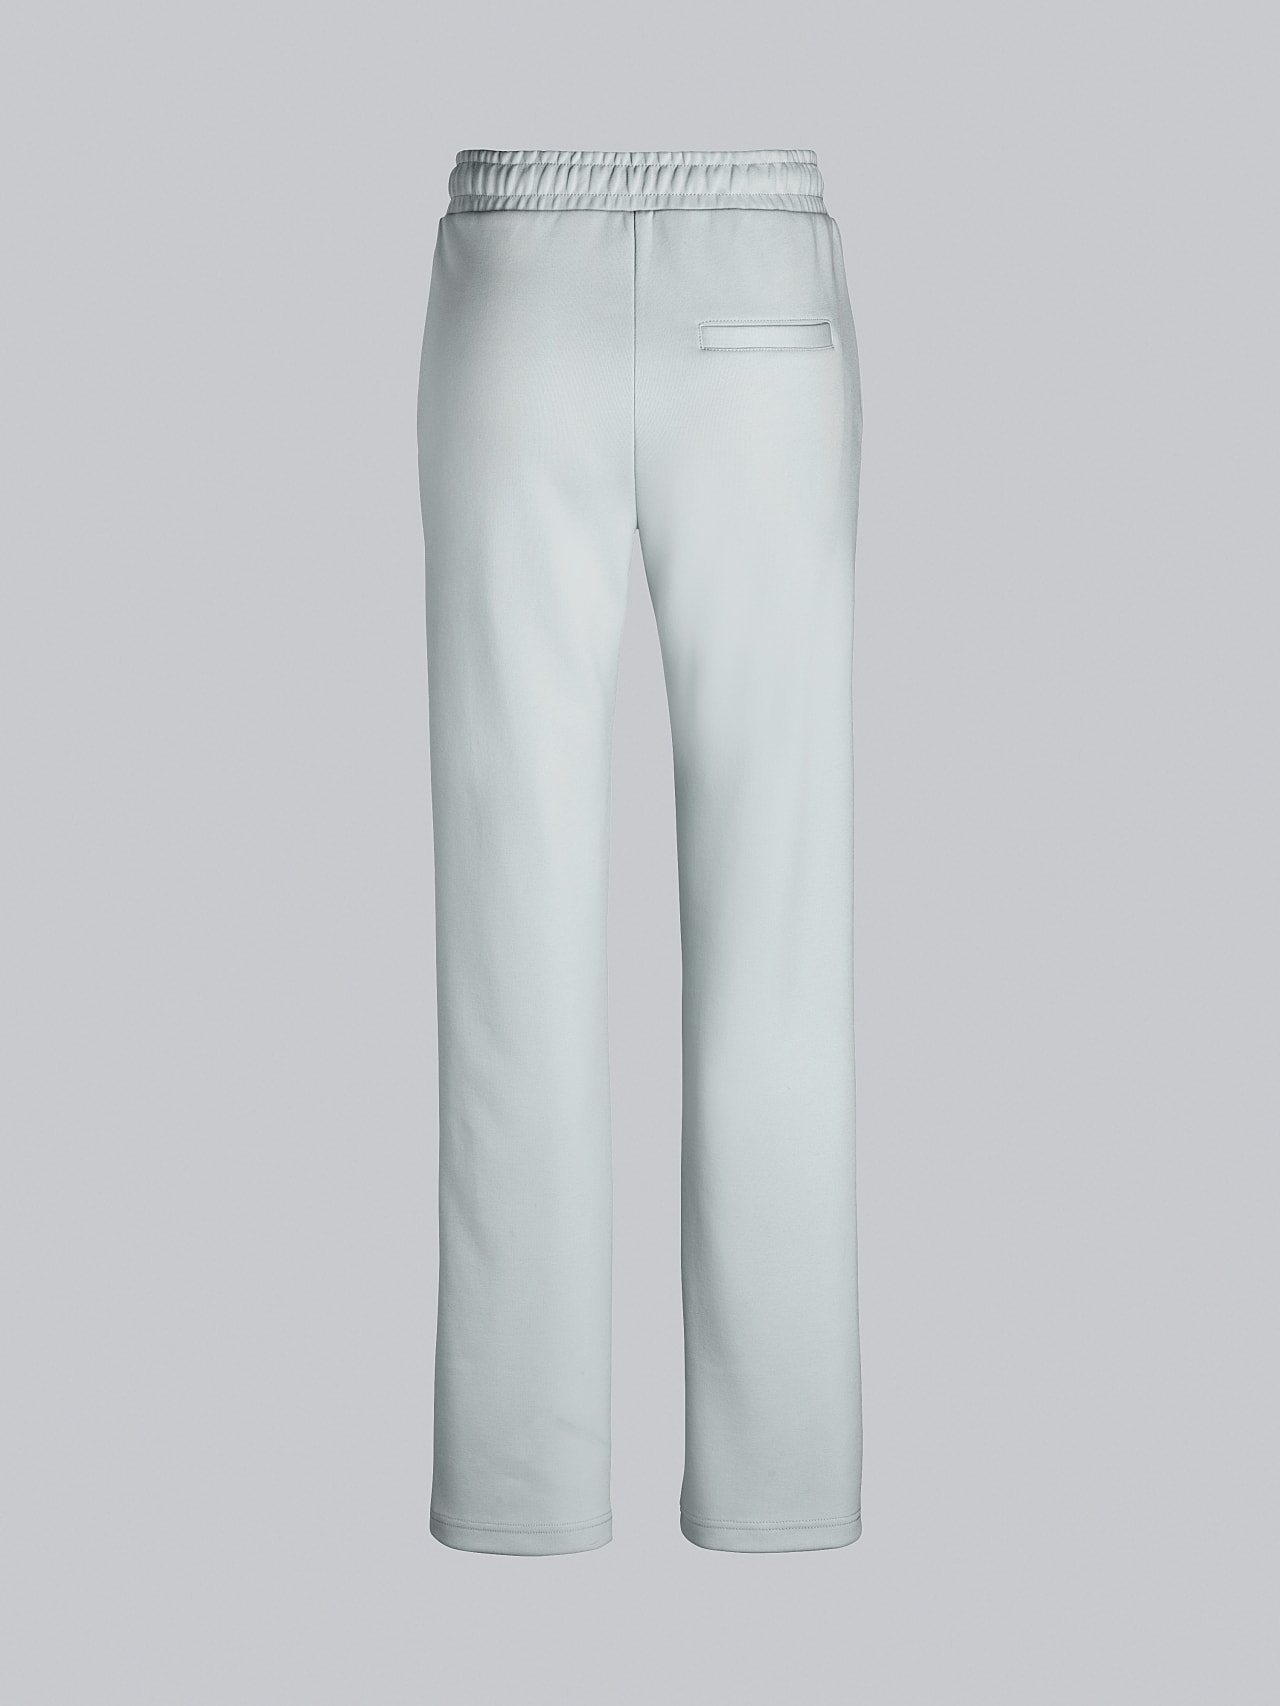 AlphaTauri | POVOA V1.Y5.02 | Relaxed-Fit Premium Sweat Pants in Pale Blue  for Women